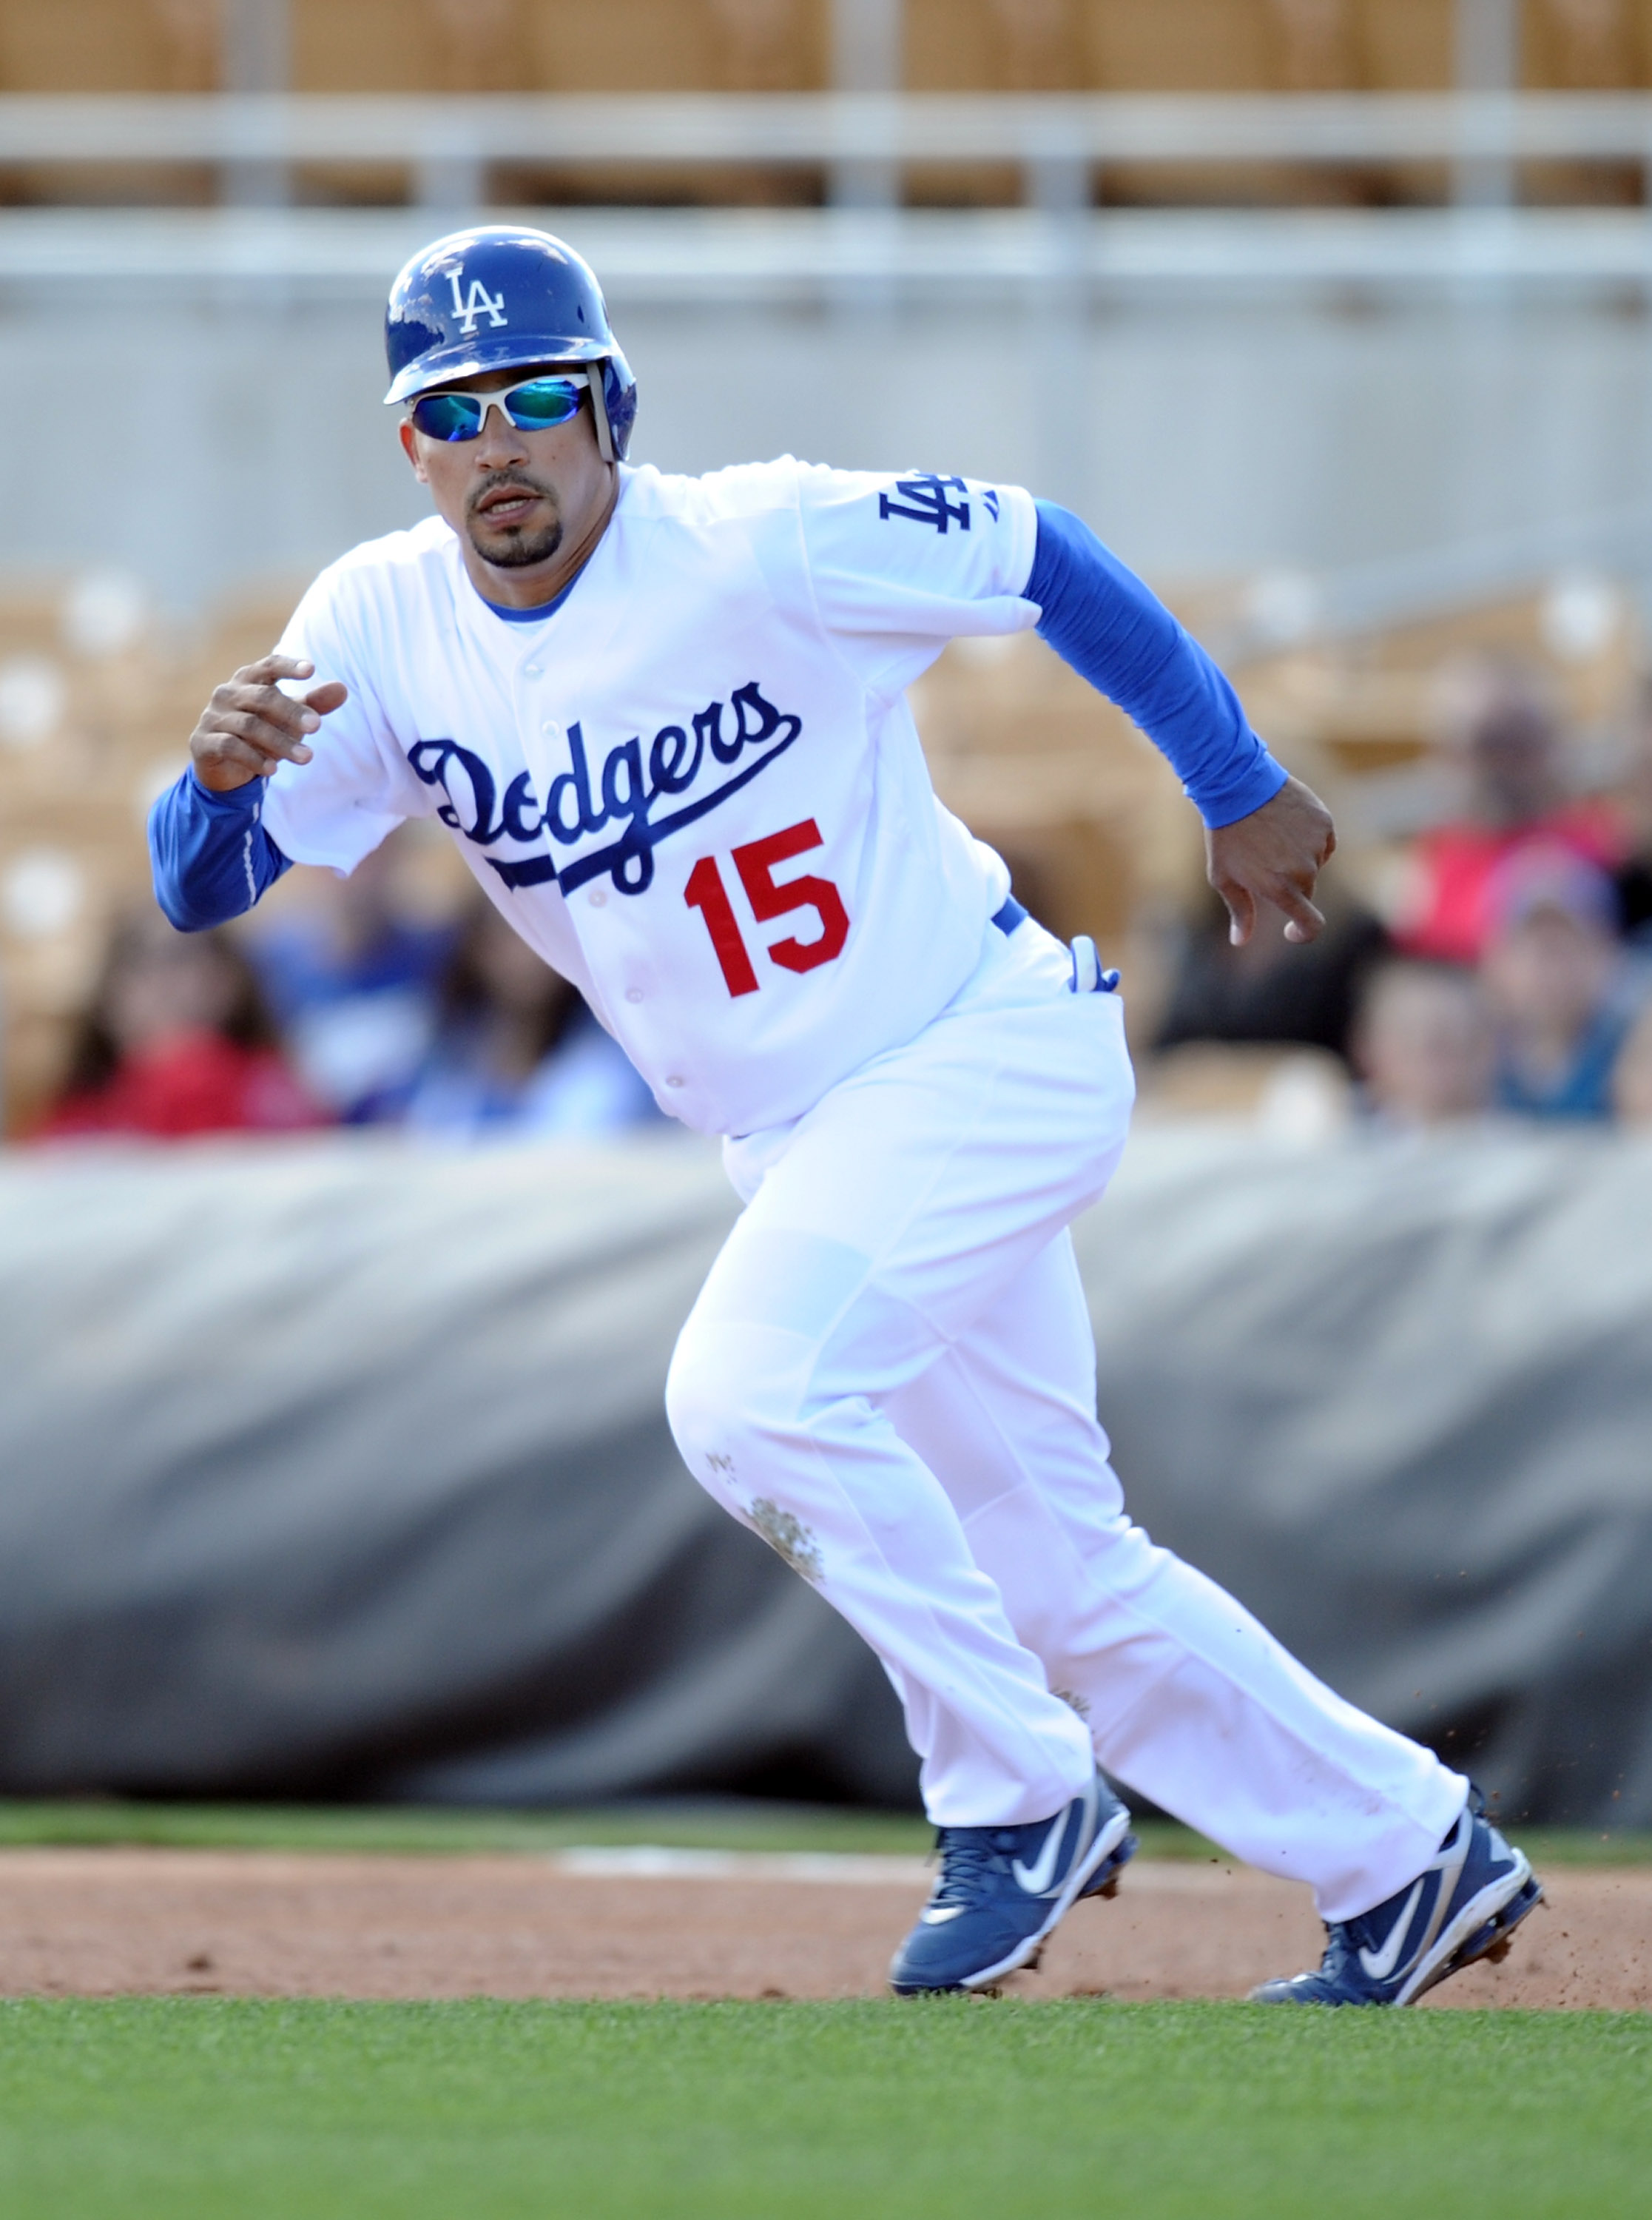 PHOENIX, AZ - FEBRUARY 27:  Rafael Furcal #15 of the Los Angeles Dodgers on base during spring training at Camelback Ranch on February 27, 2011 in Phoenix, Arizona.  (Photo by Harry How/Getty Images)